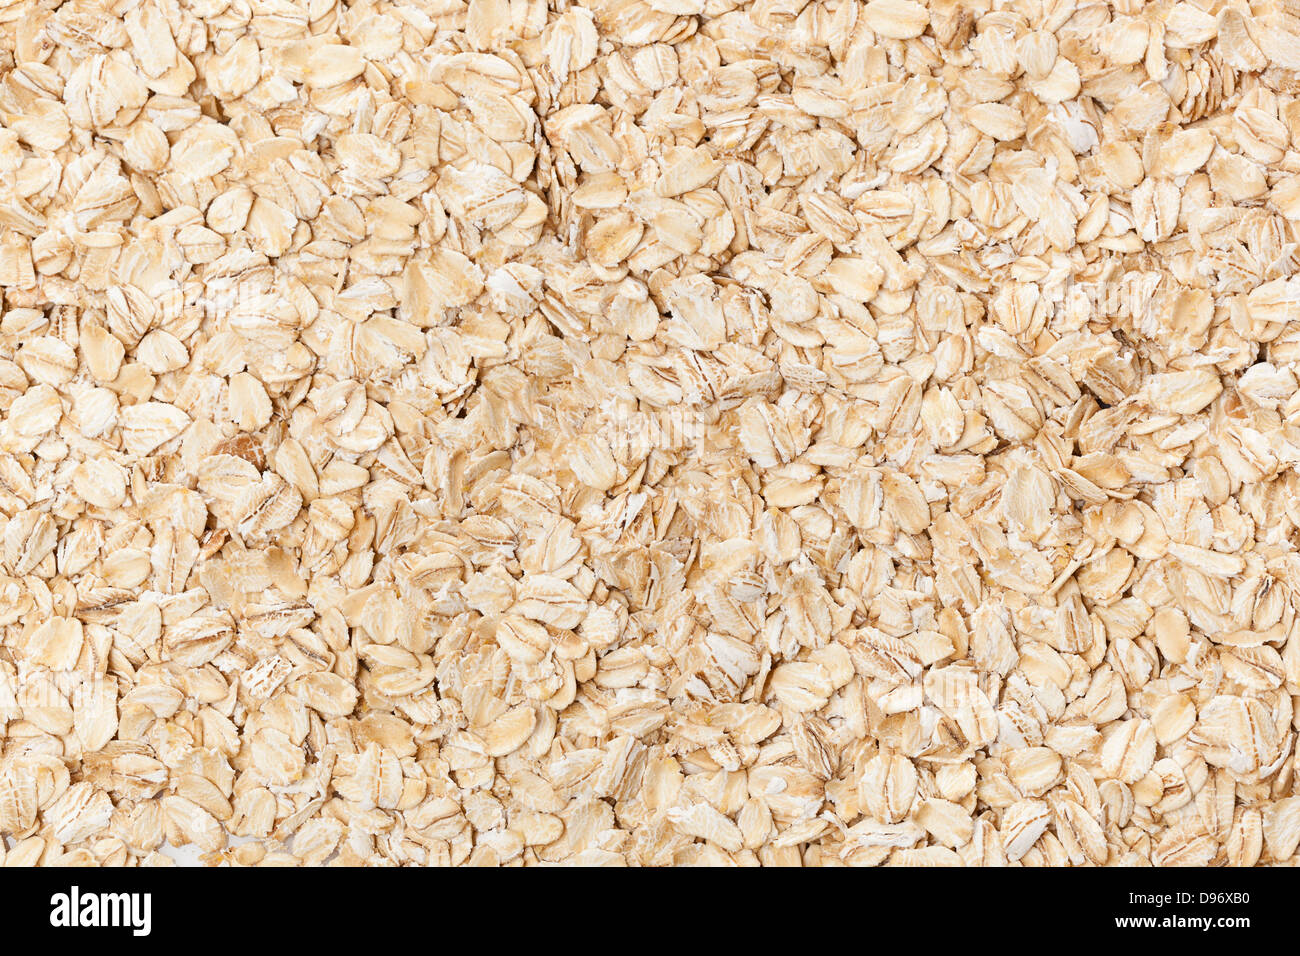 A Healthy Dry Oat meal background Stock Photo